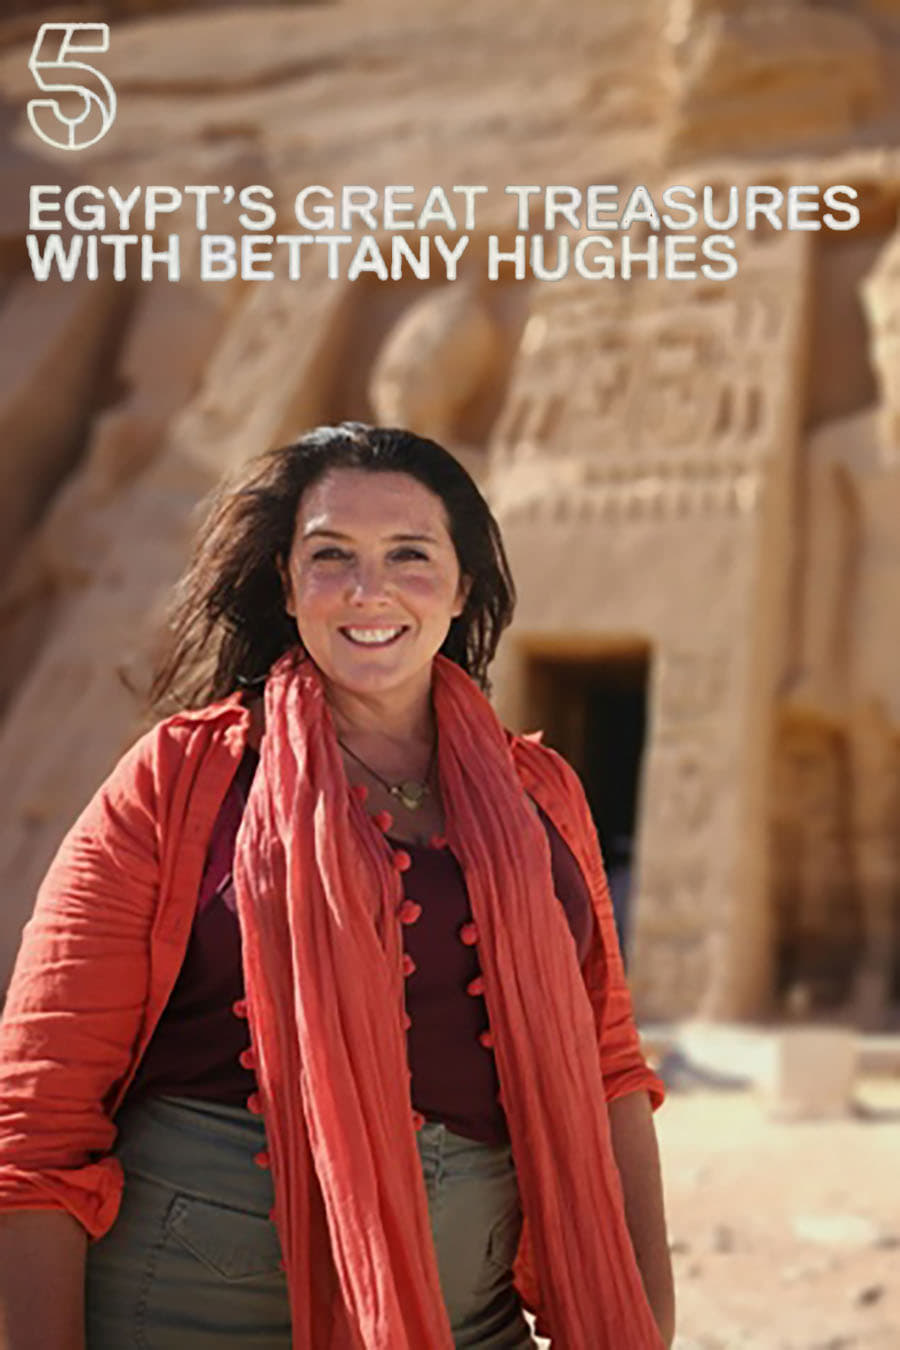 Egypt's Great Treasures with Bettany Hughes